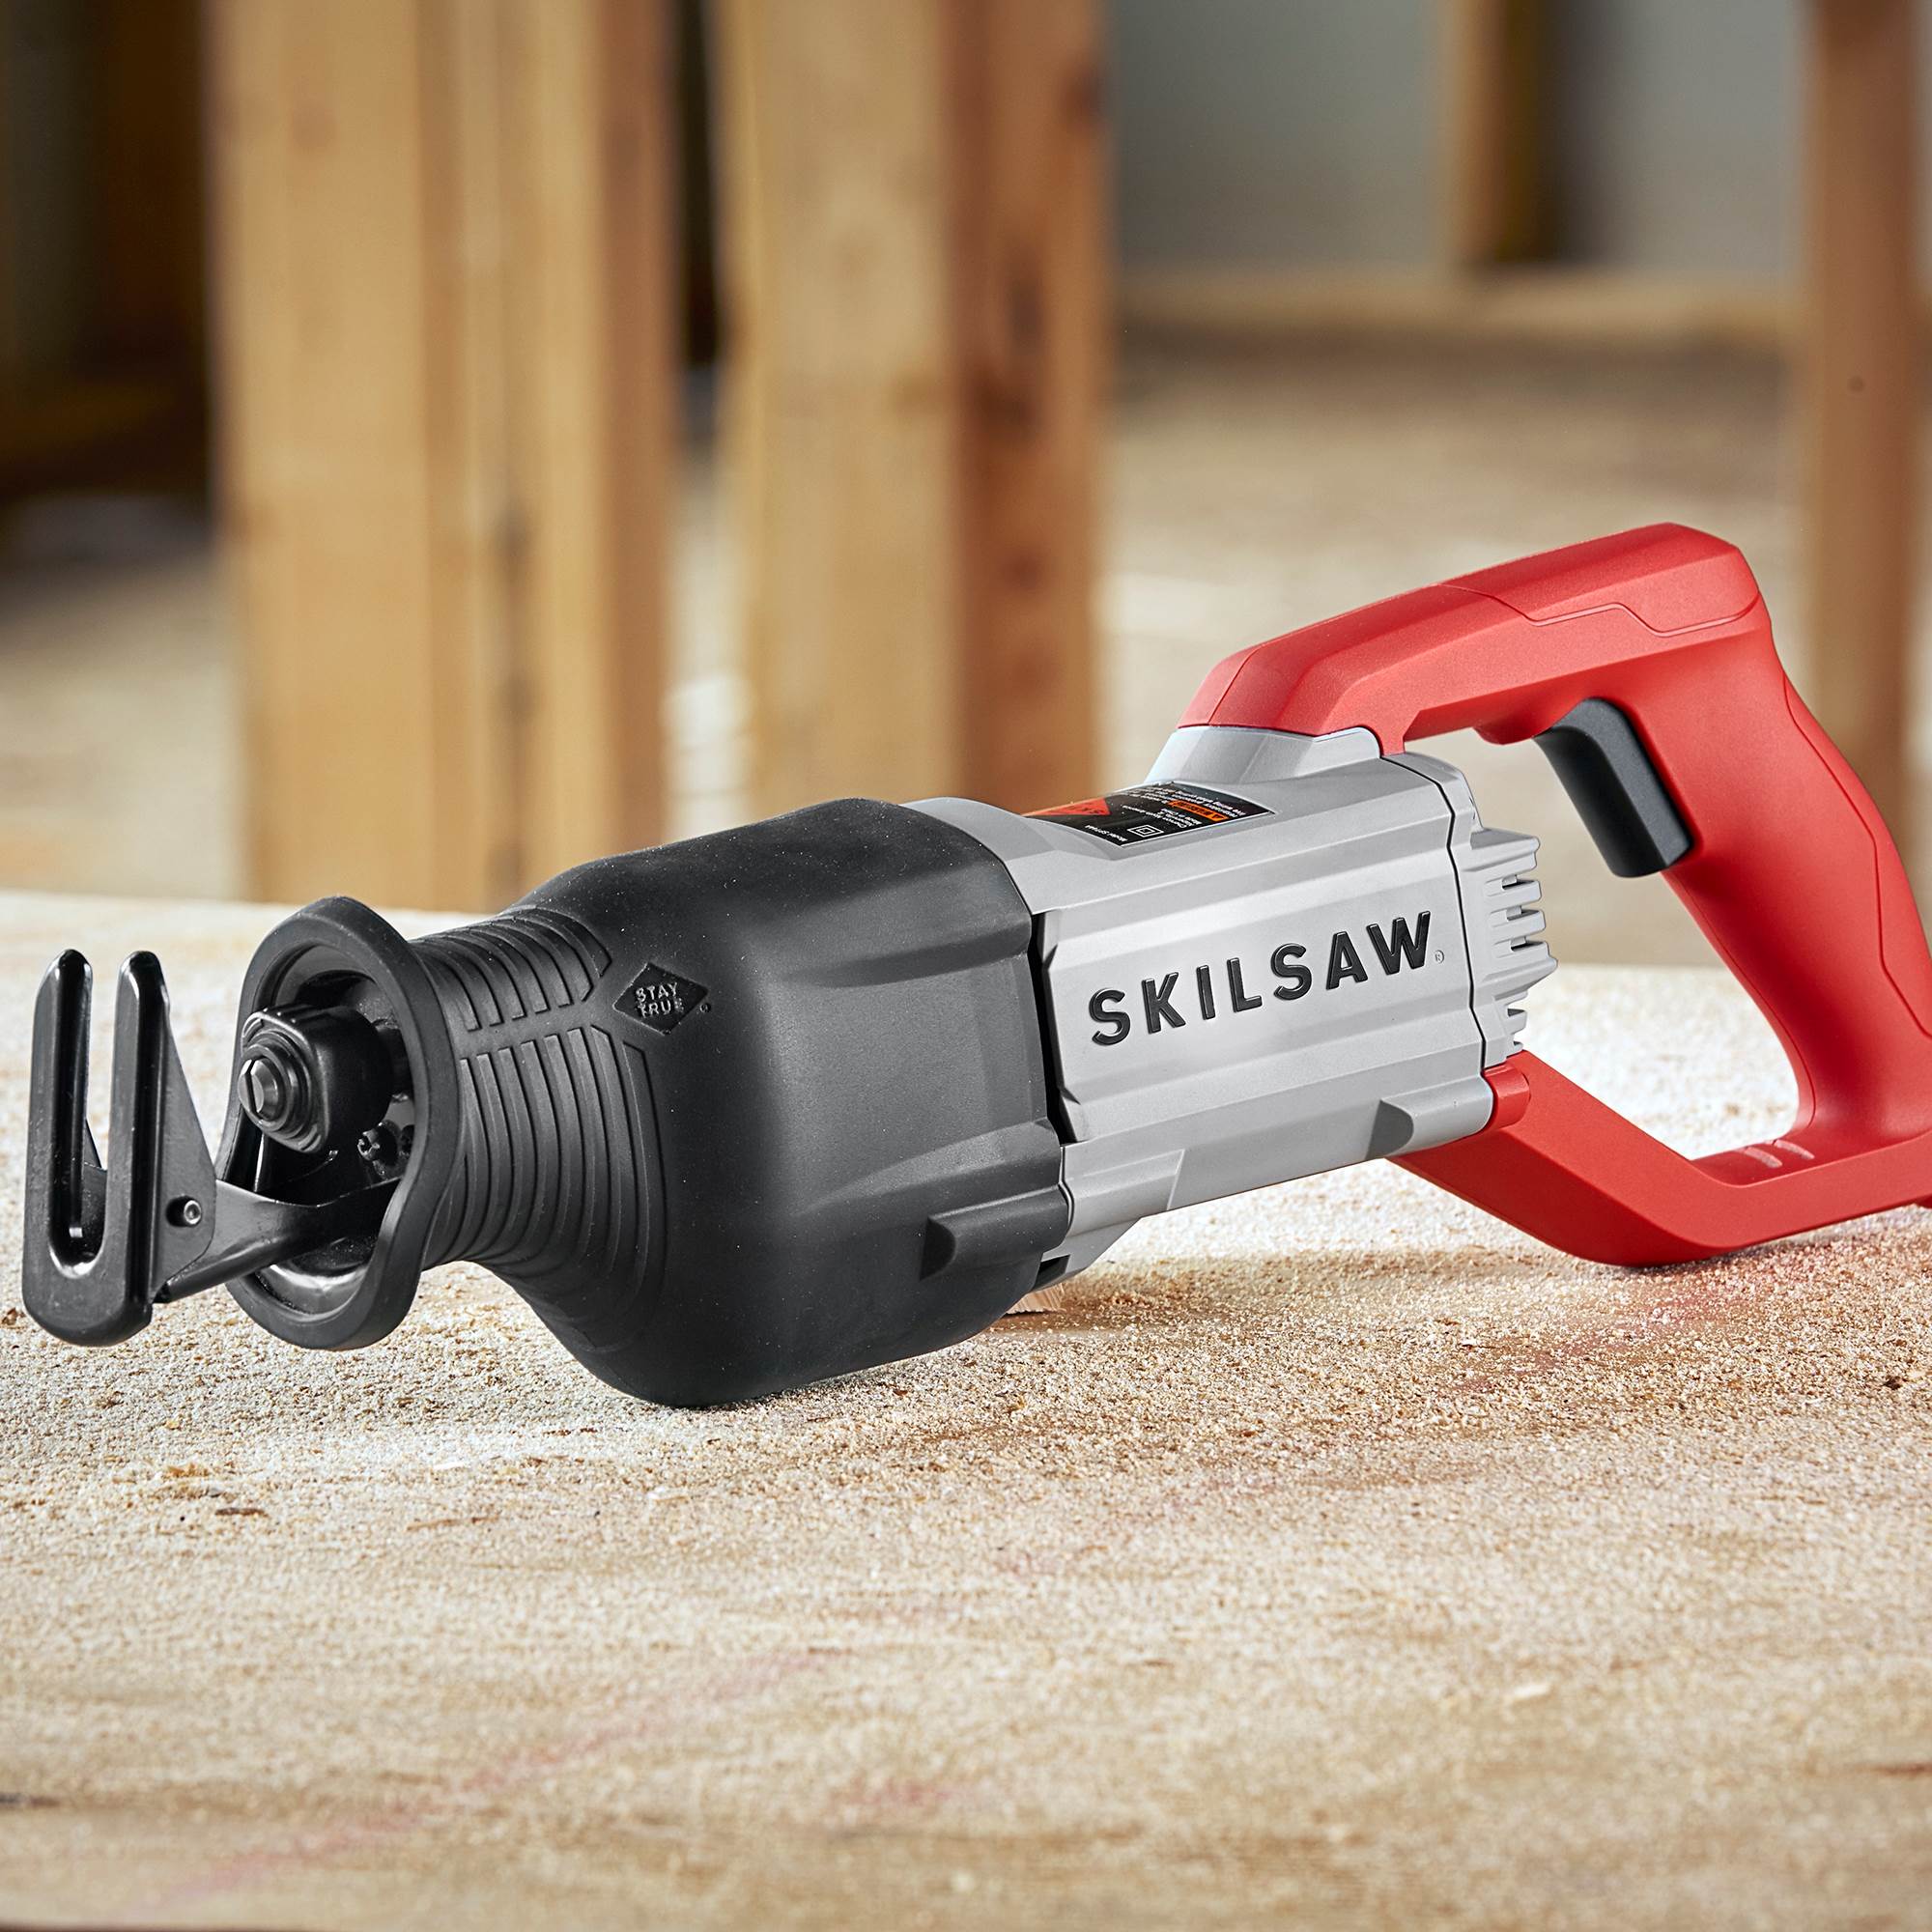 SKILSAW 13-Amp Reciprocating Saw with Buzzkill Technology, SPT44A-00 - image 6 of 8